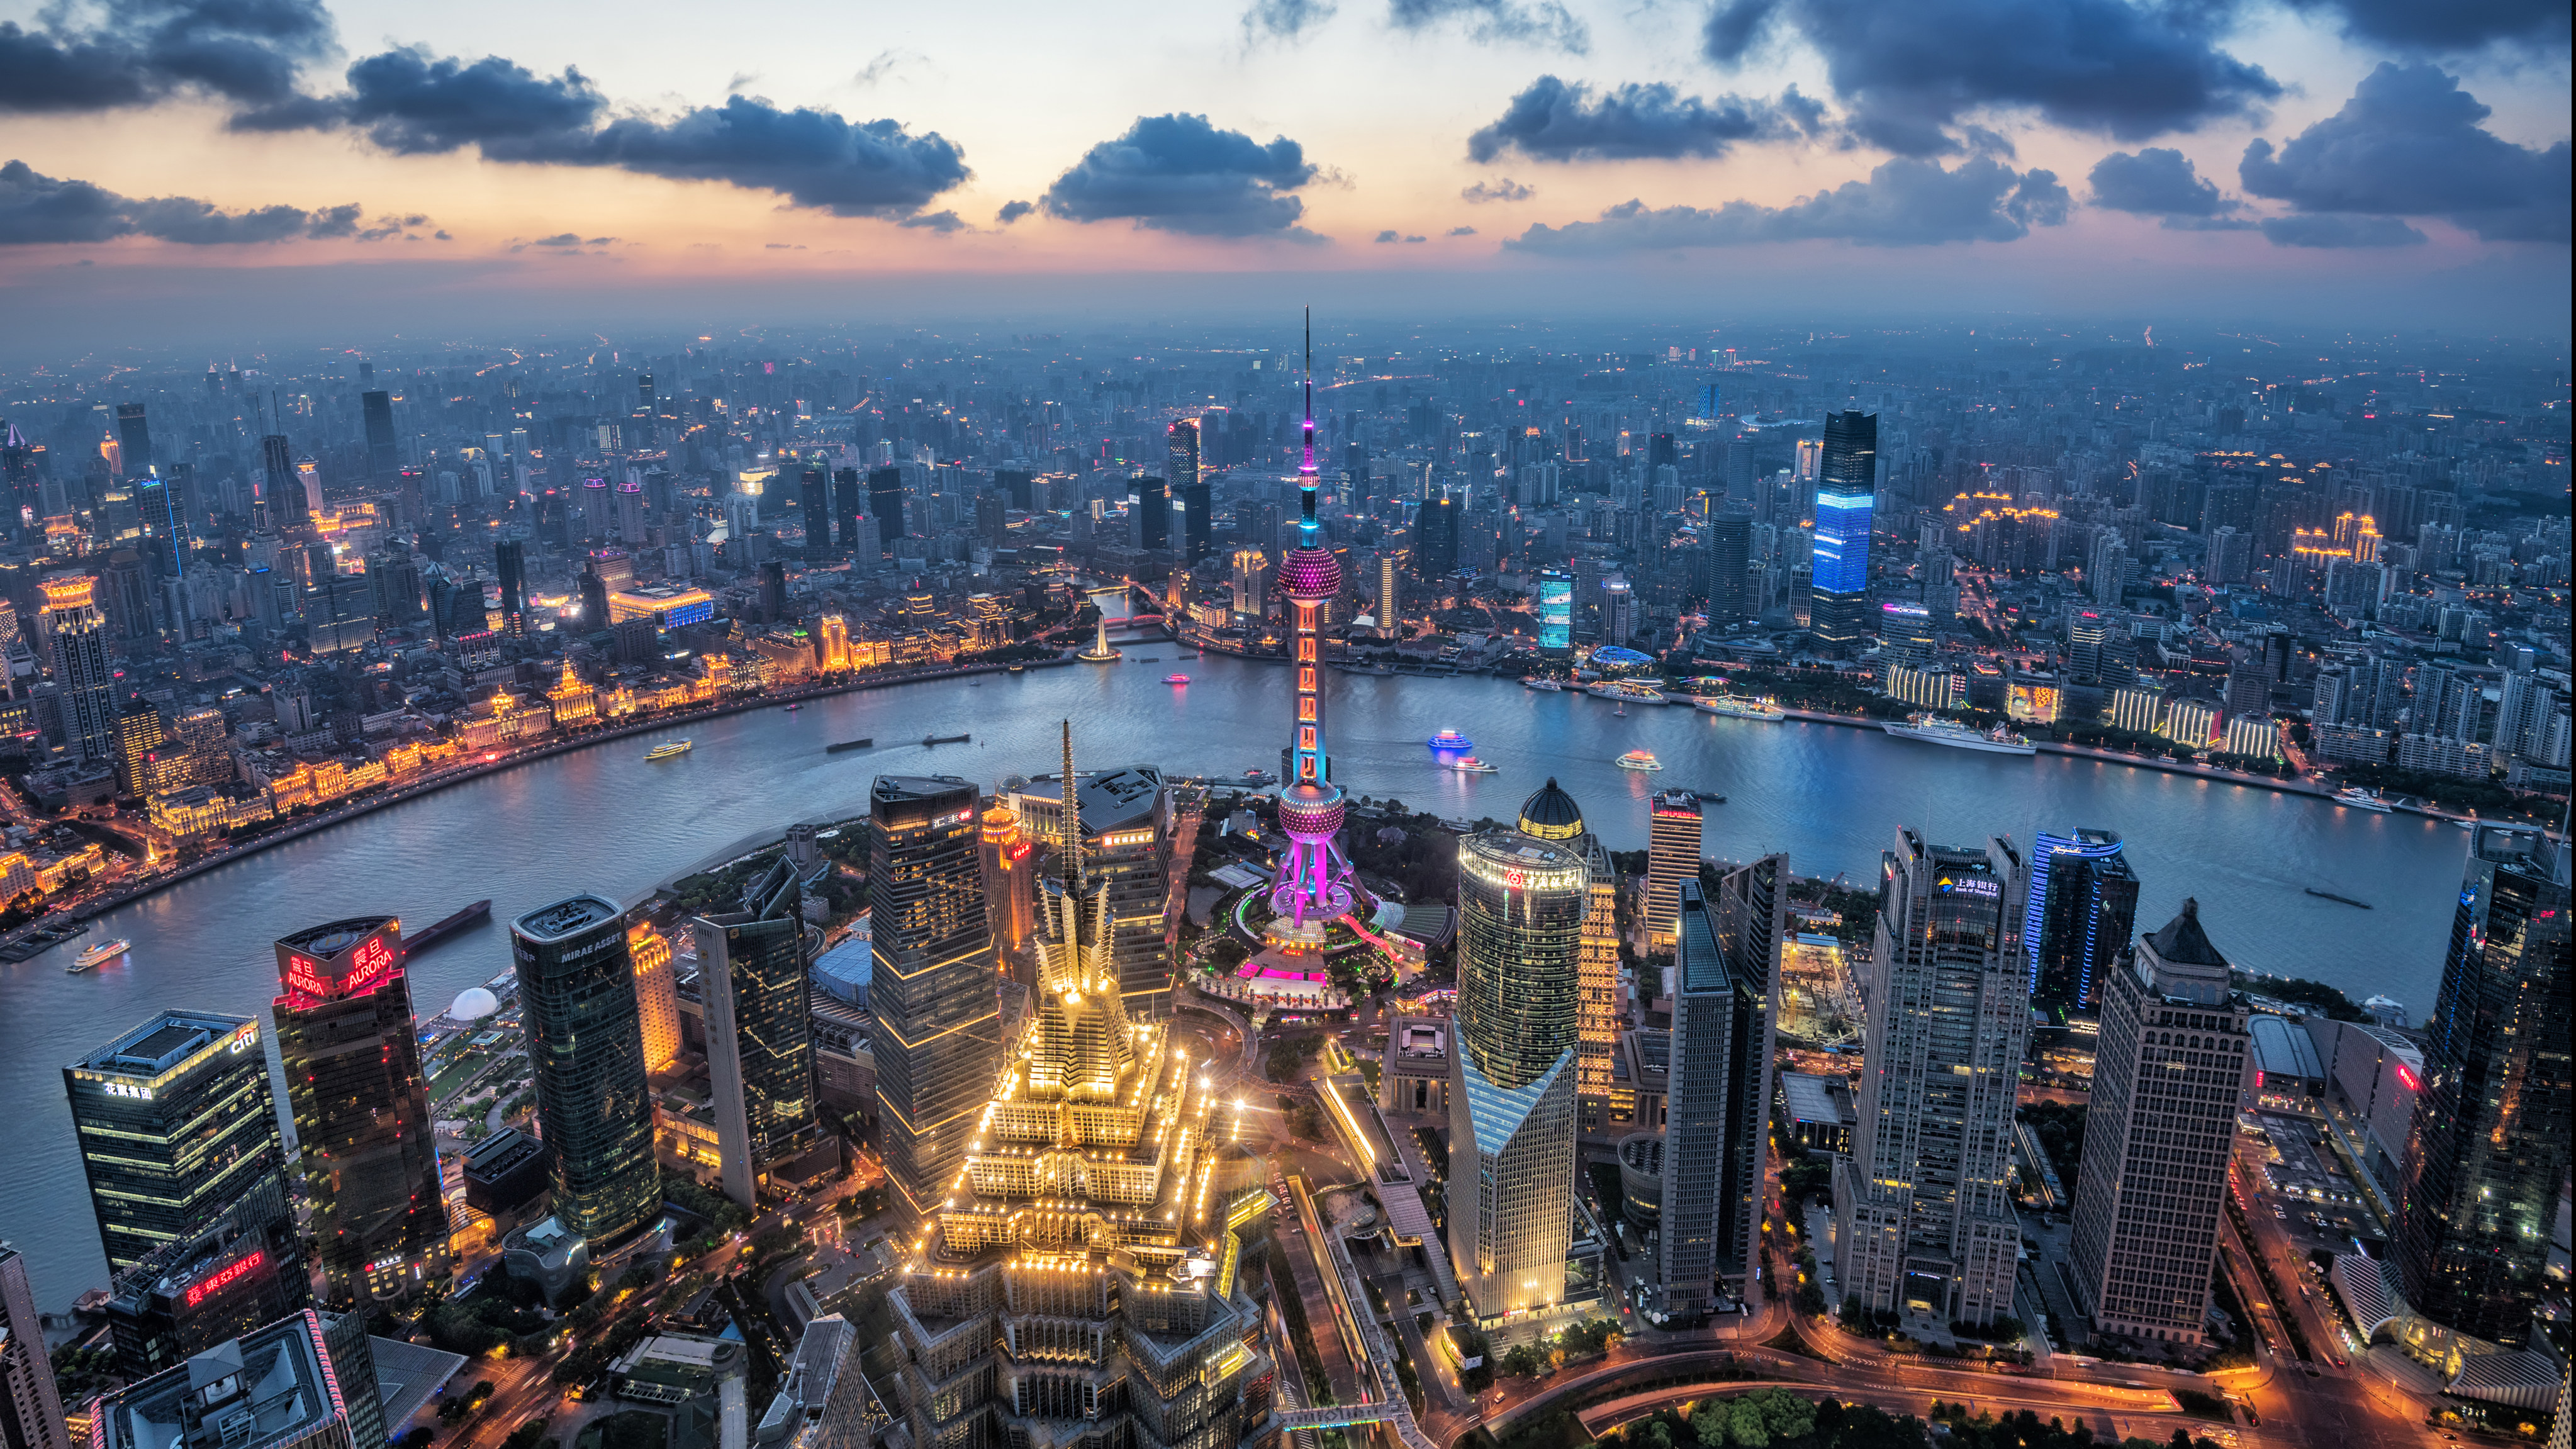 The Huangpu River runs across Shanghai. The local Huangpu district plan to launch a fund to support promising technology companies. Photo: Getty Images